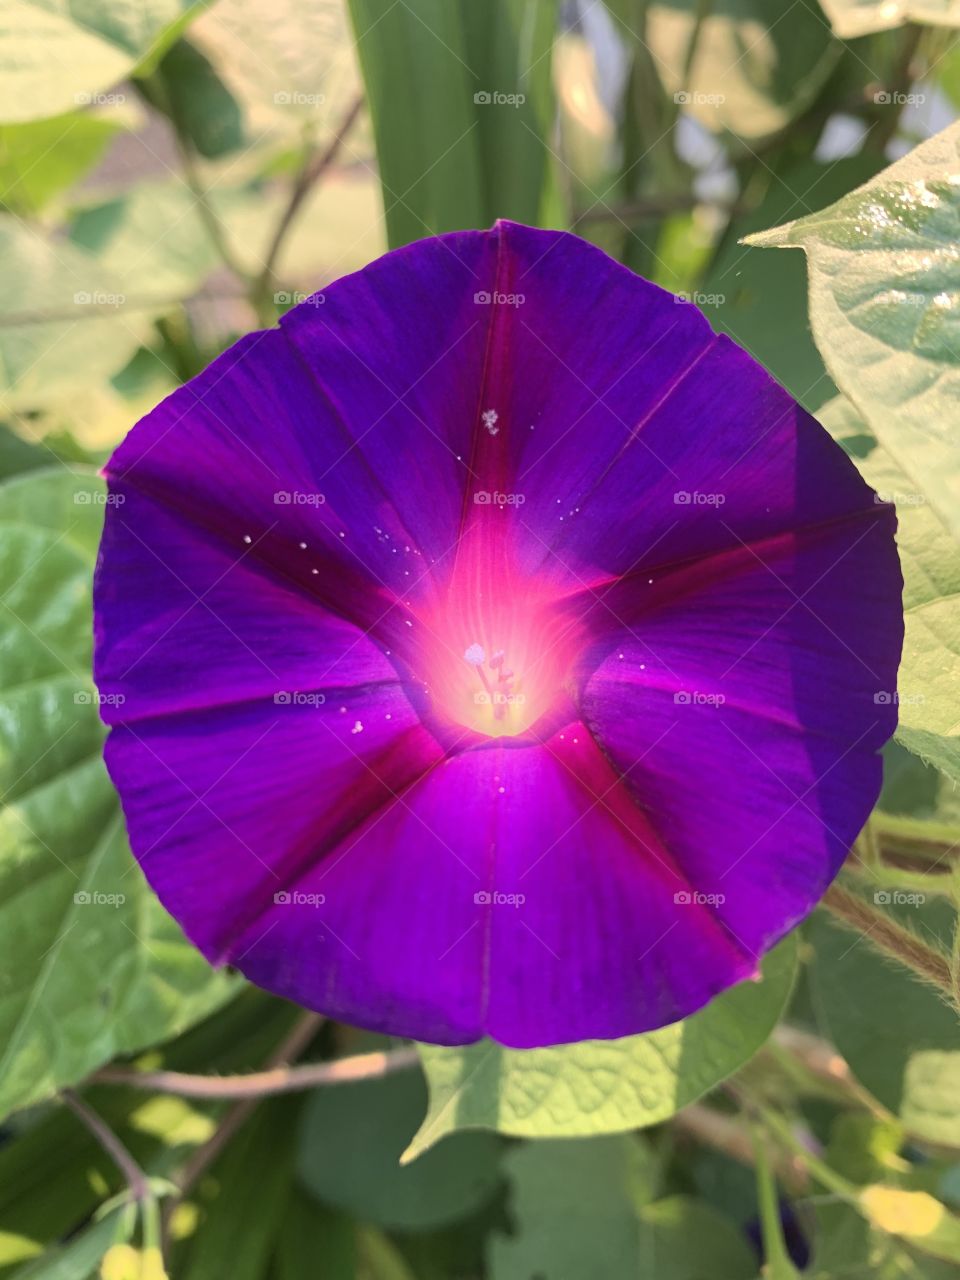 Vibrant Morning Glory welcoming the day! 🌸🍃 